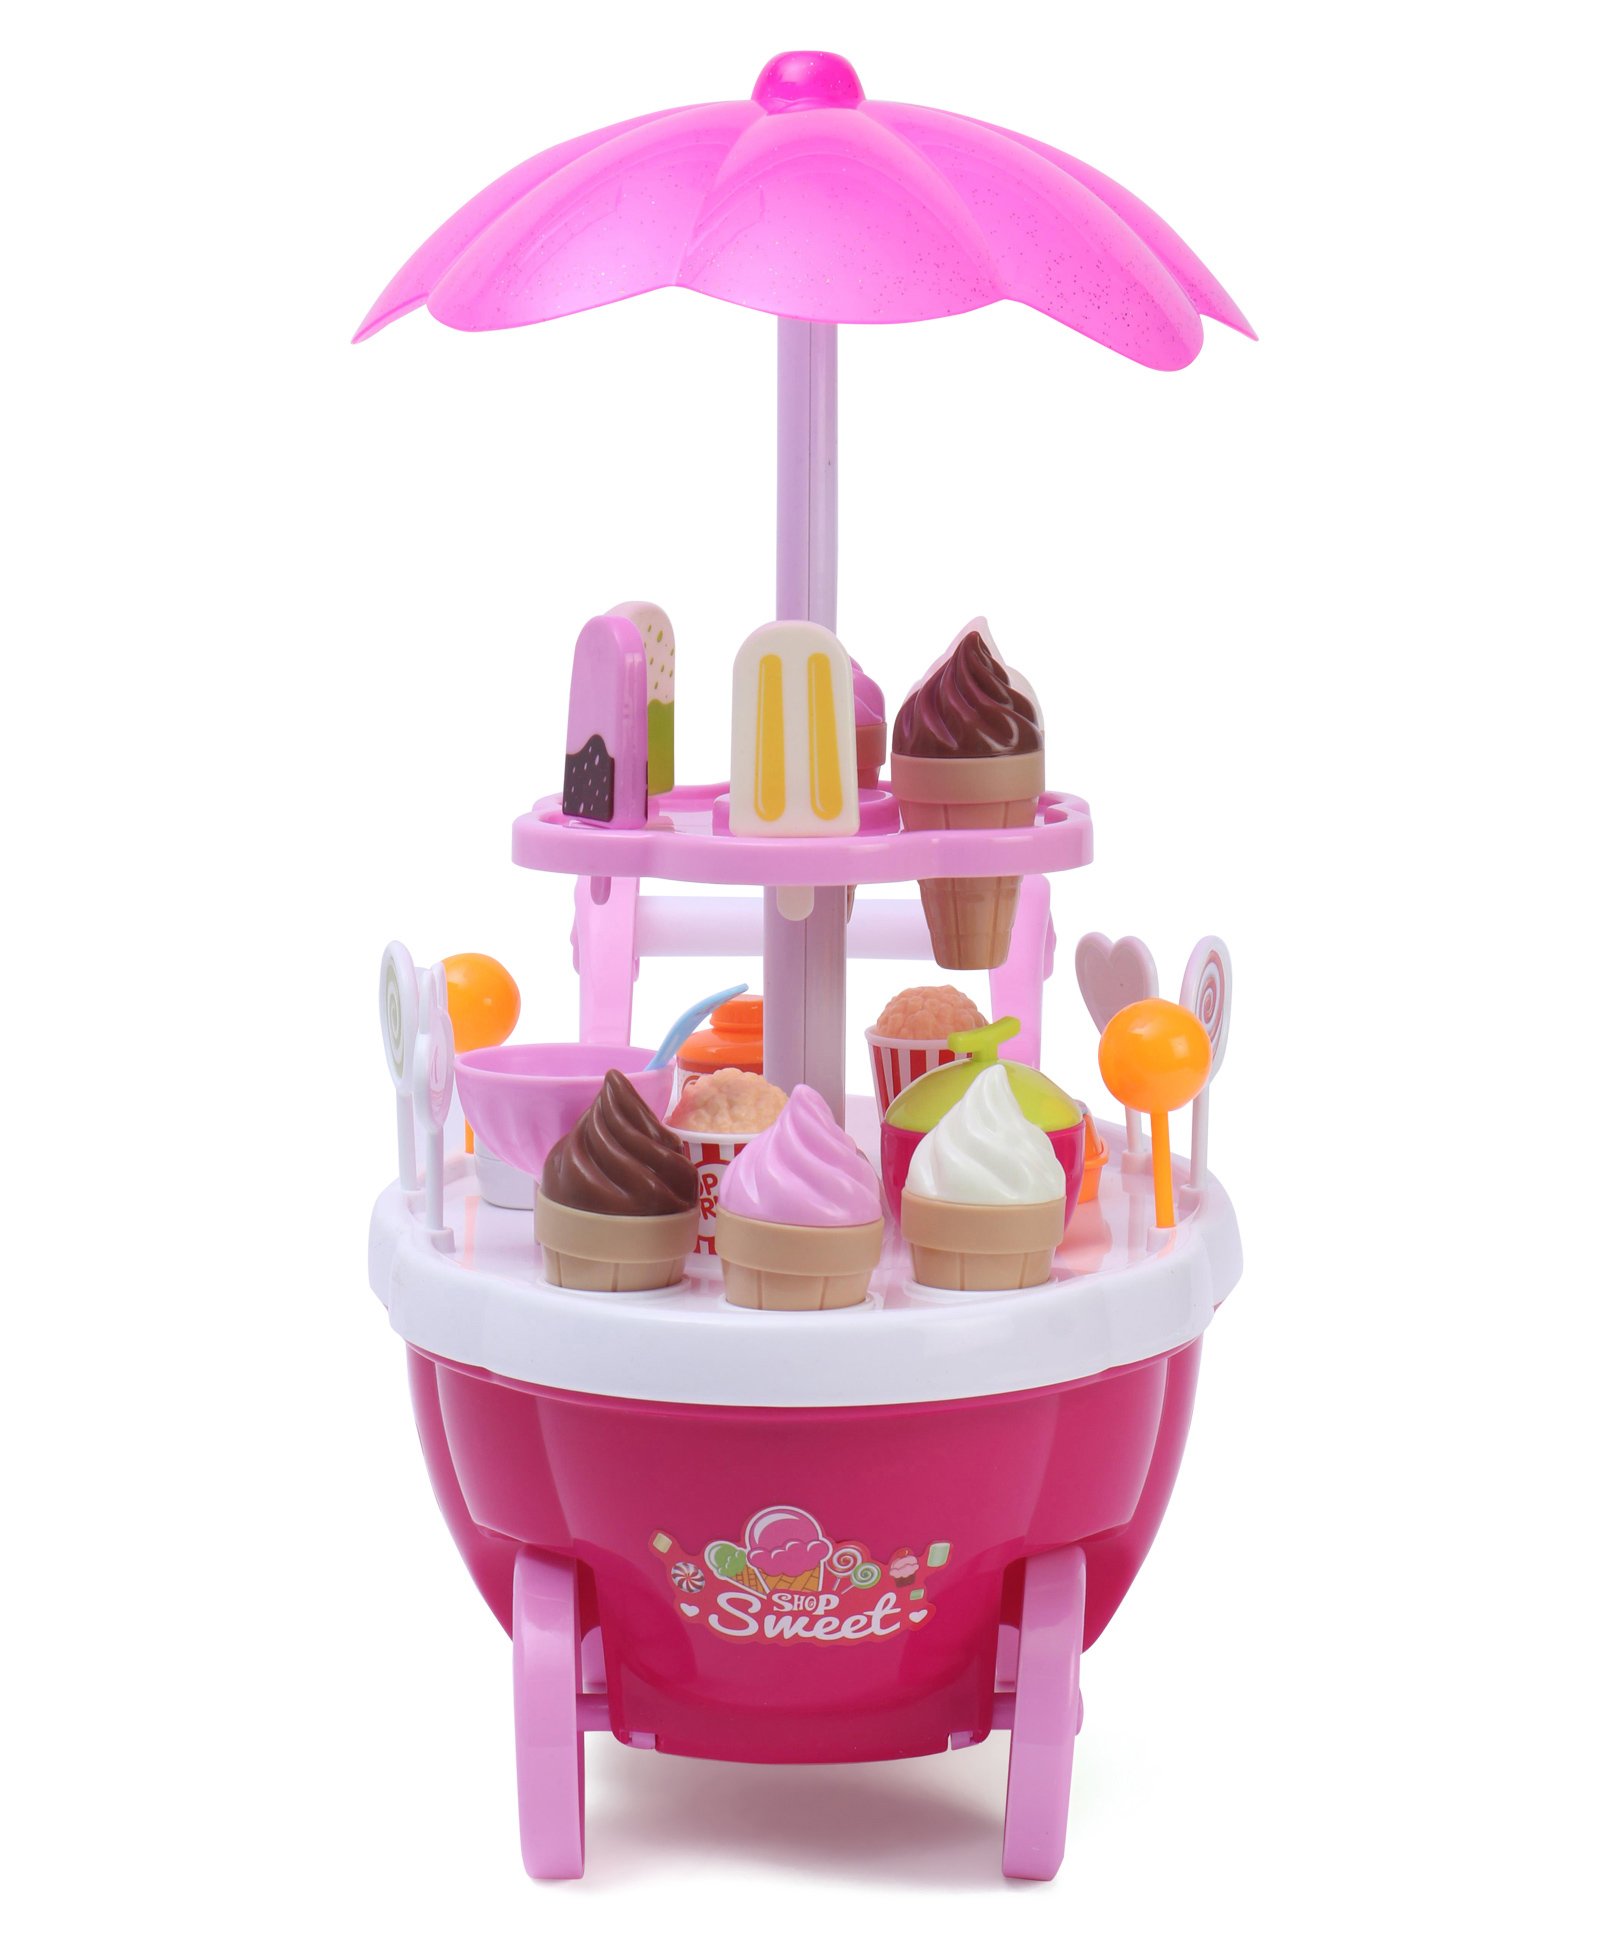 SWEET SHOP TOY CANDY CART 30 PCS TROLLEY LIGHT AND SOUND